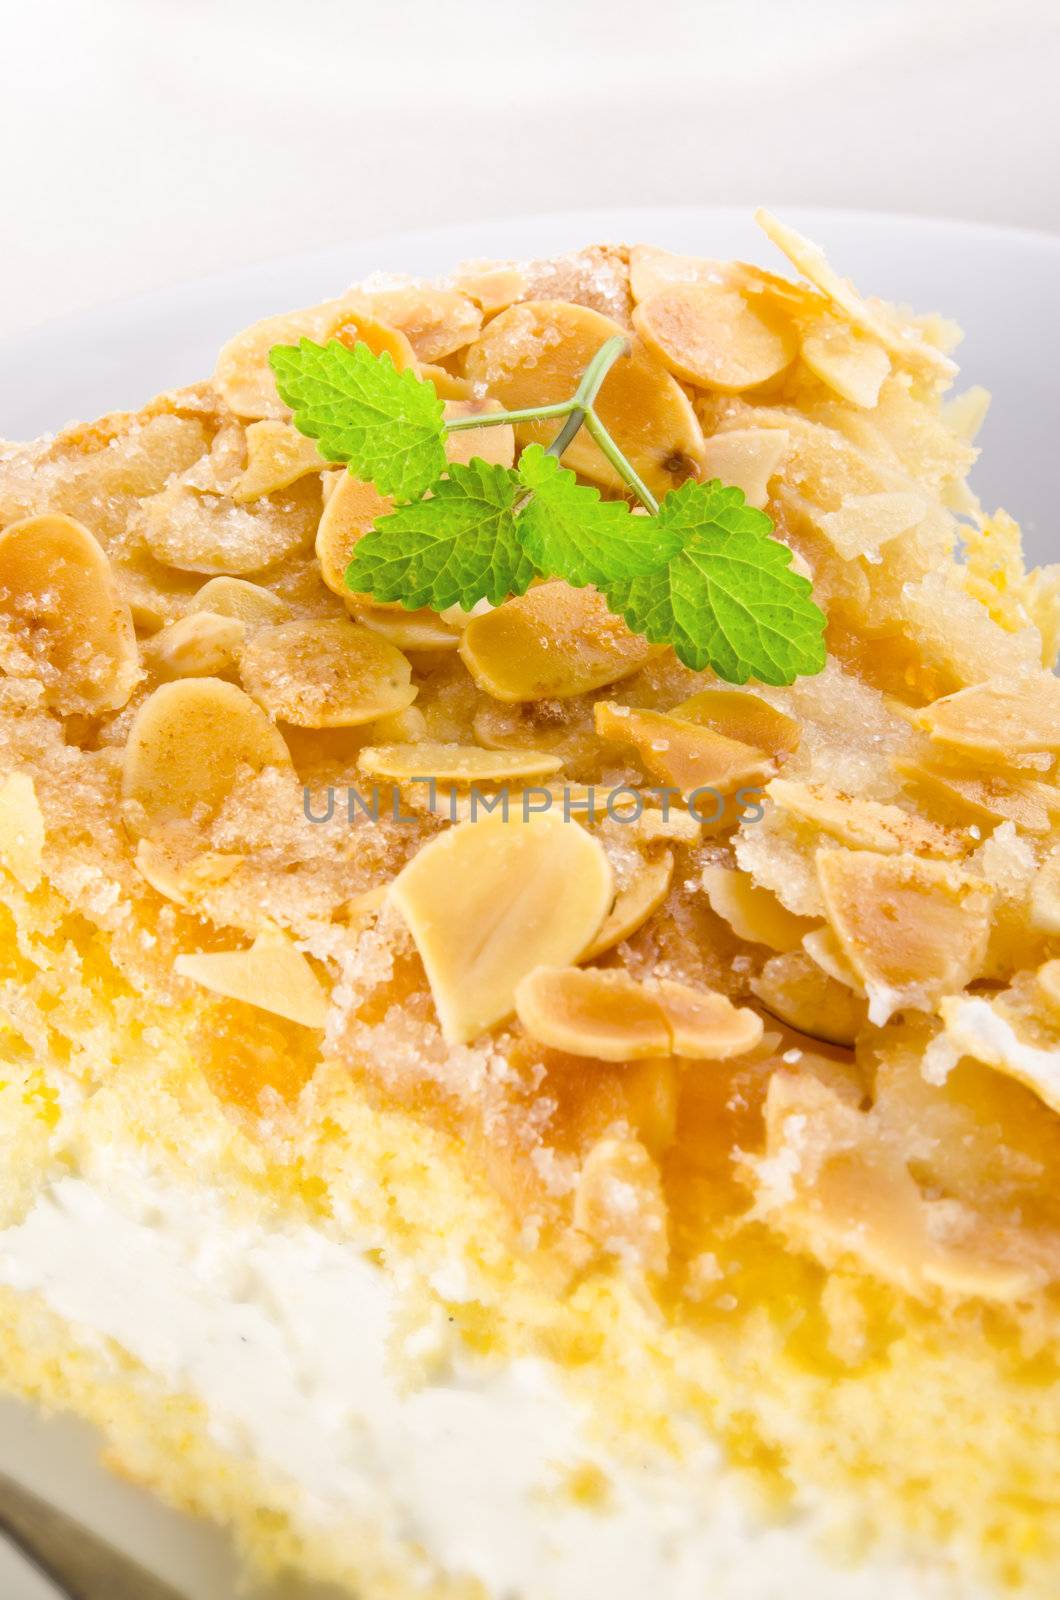 flat cake with an almond and sugar coating and a custard or cream filling by Darius.Dzinnik